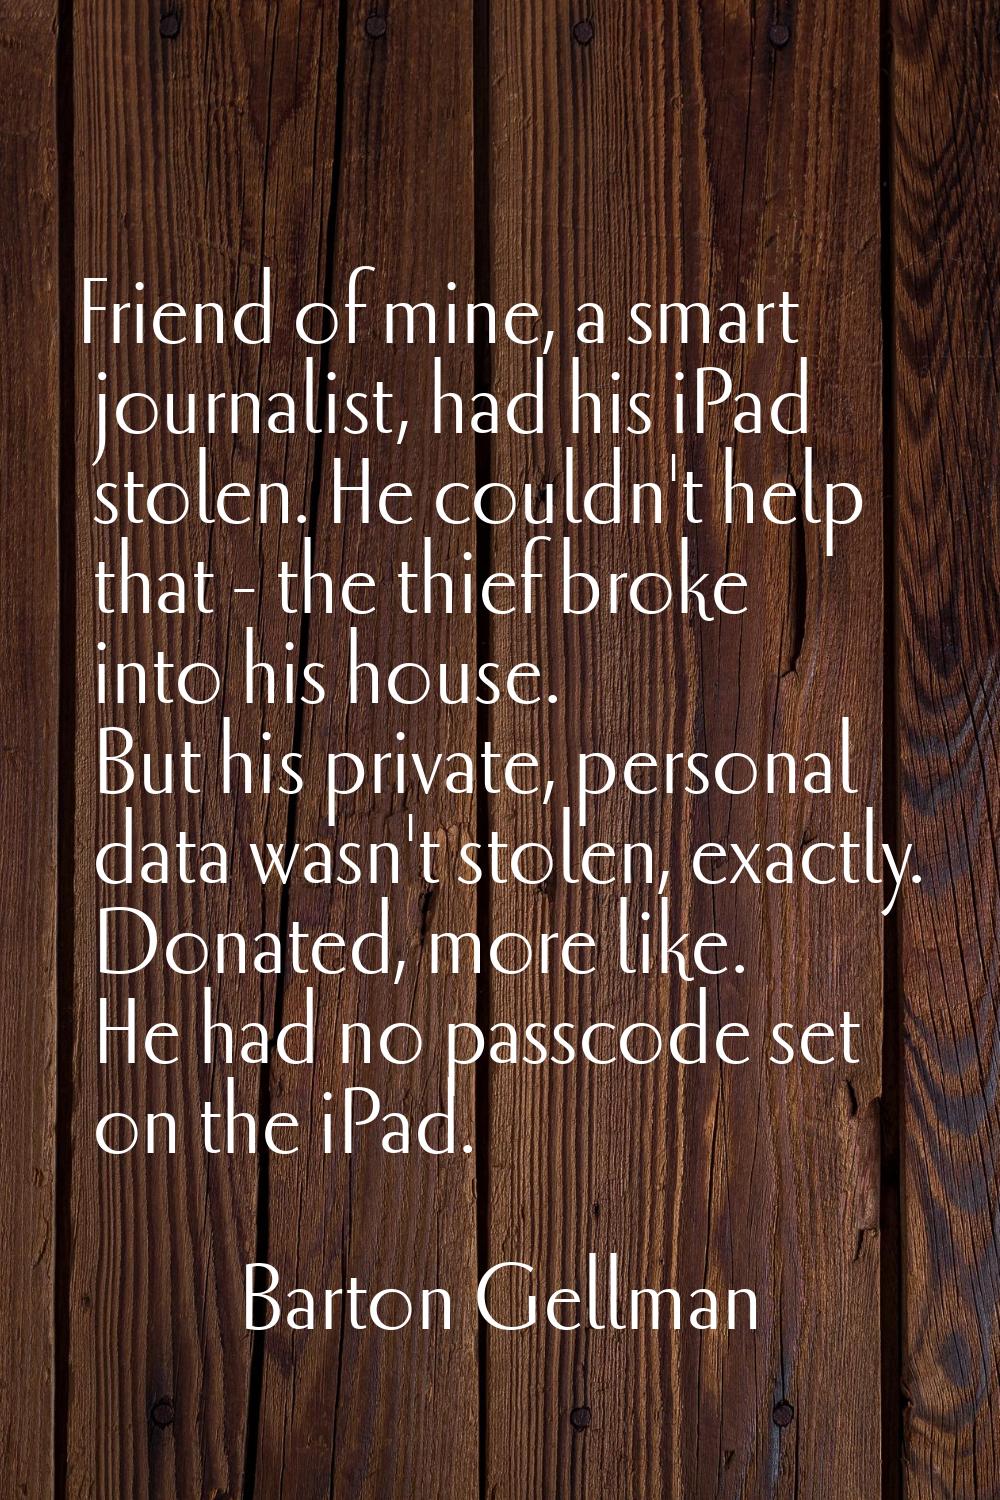 Friend of mine, a smart journalist, had his iPad stolen. He couldn't help that - the thief broke in